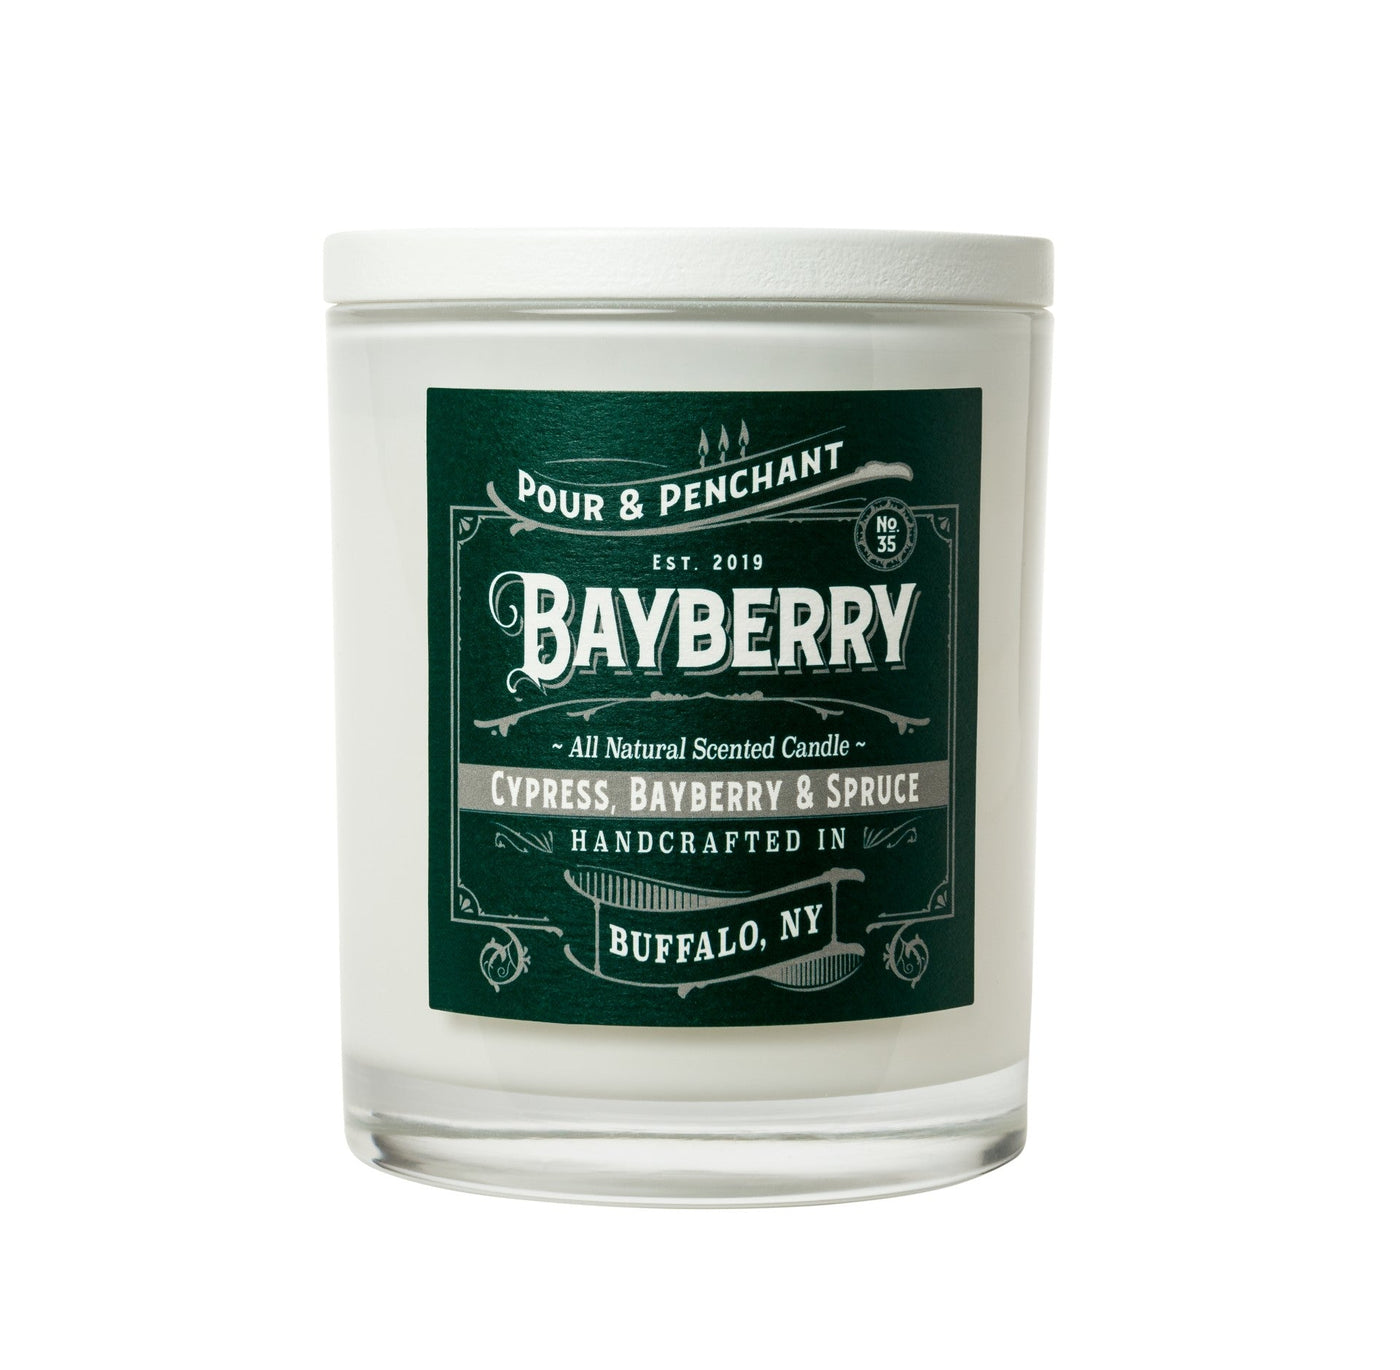 Pour & Penchant 13 oz Scented Candle - BAYBERRY no.35 - Bayberry, Cypress & Blue Spruce